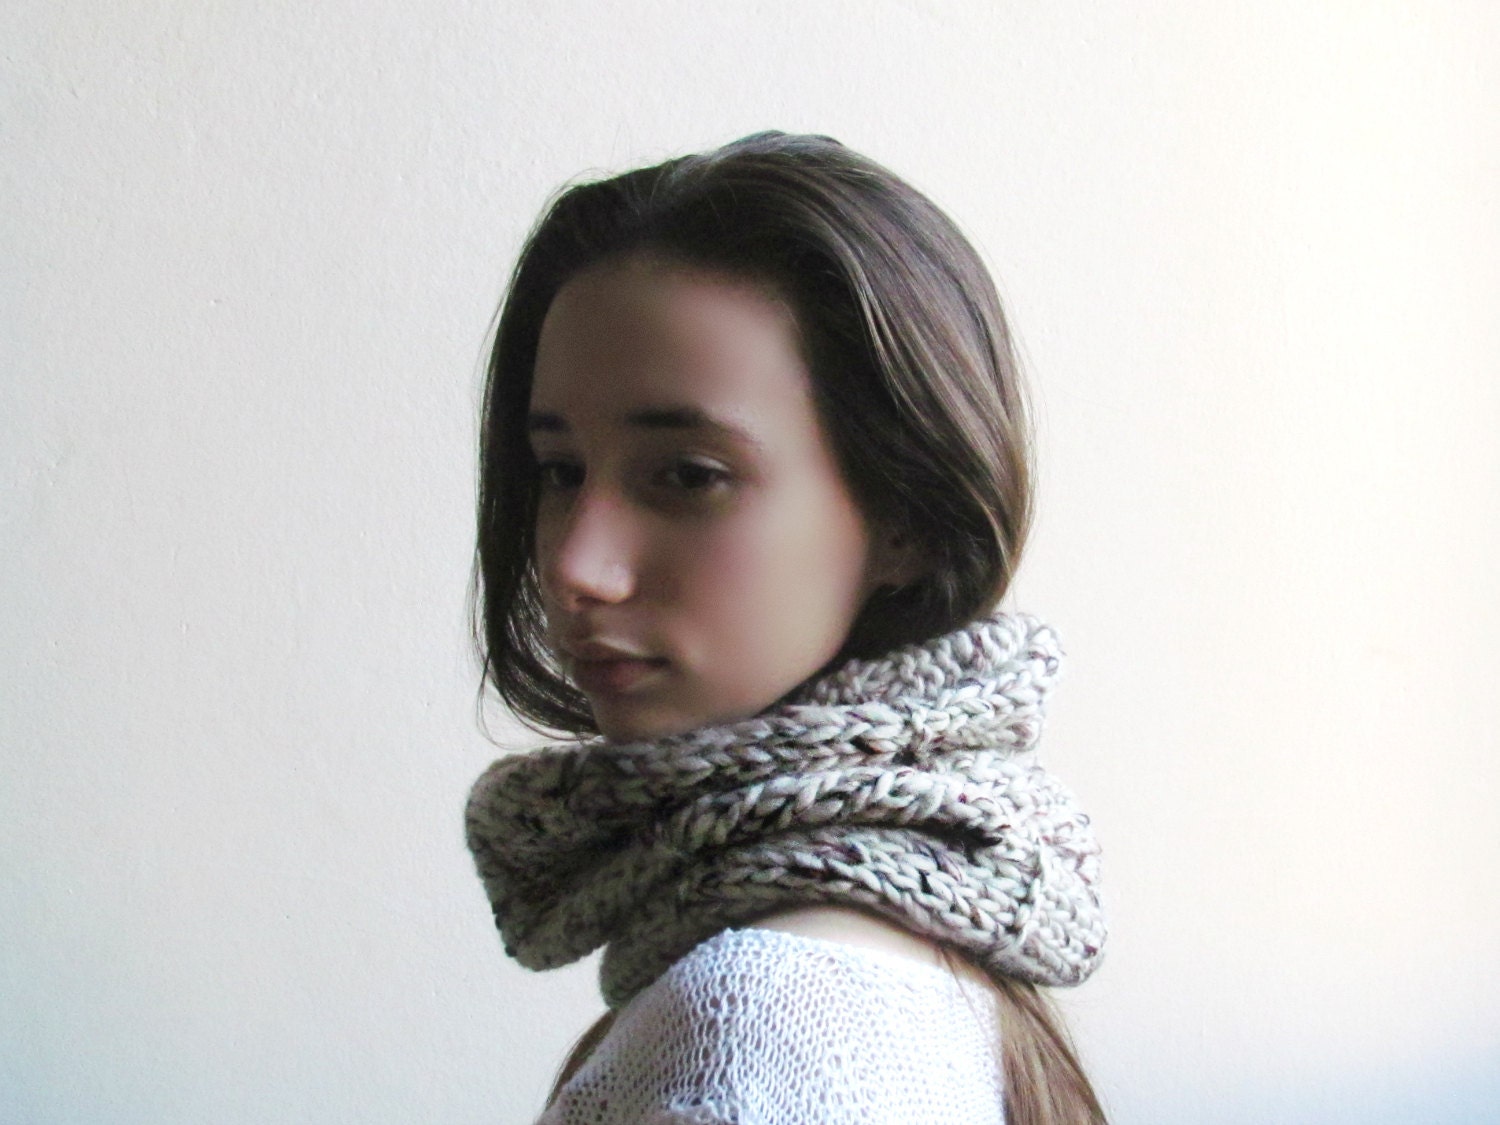 Oatmeal scarf /  Pure wool / Rustic fashion / Winter accessories unisex / winter scarf